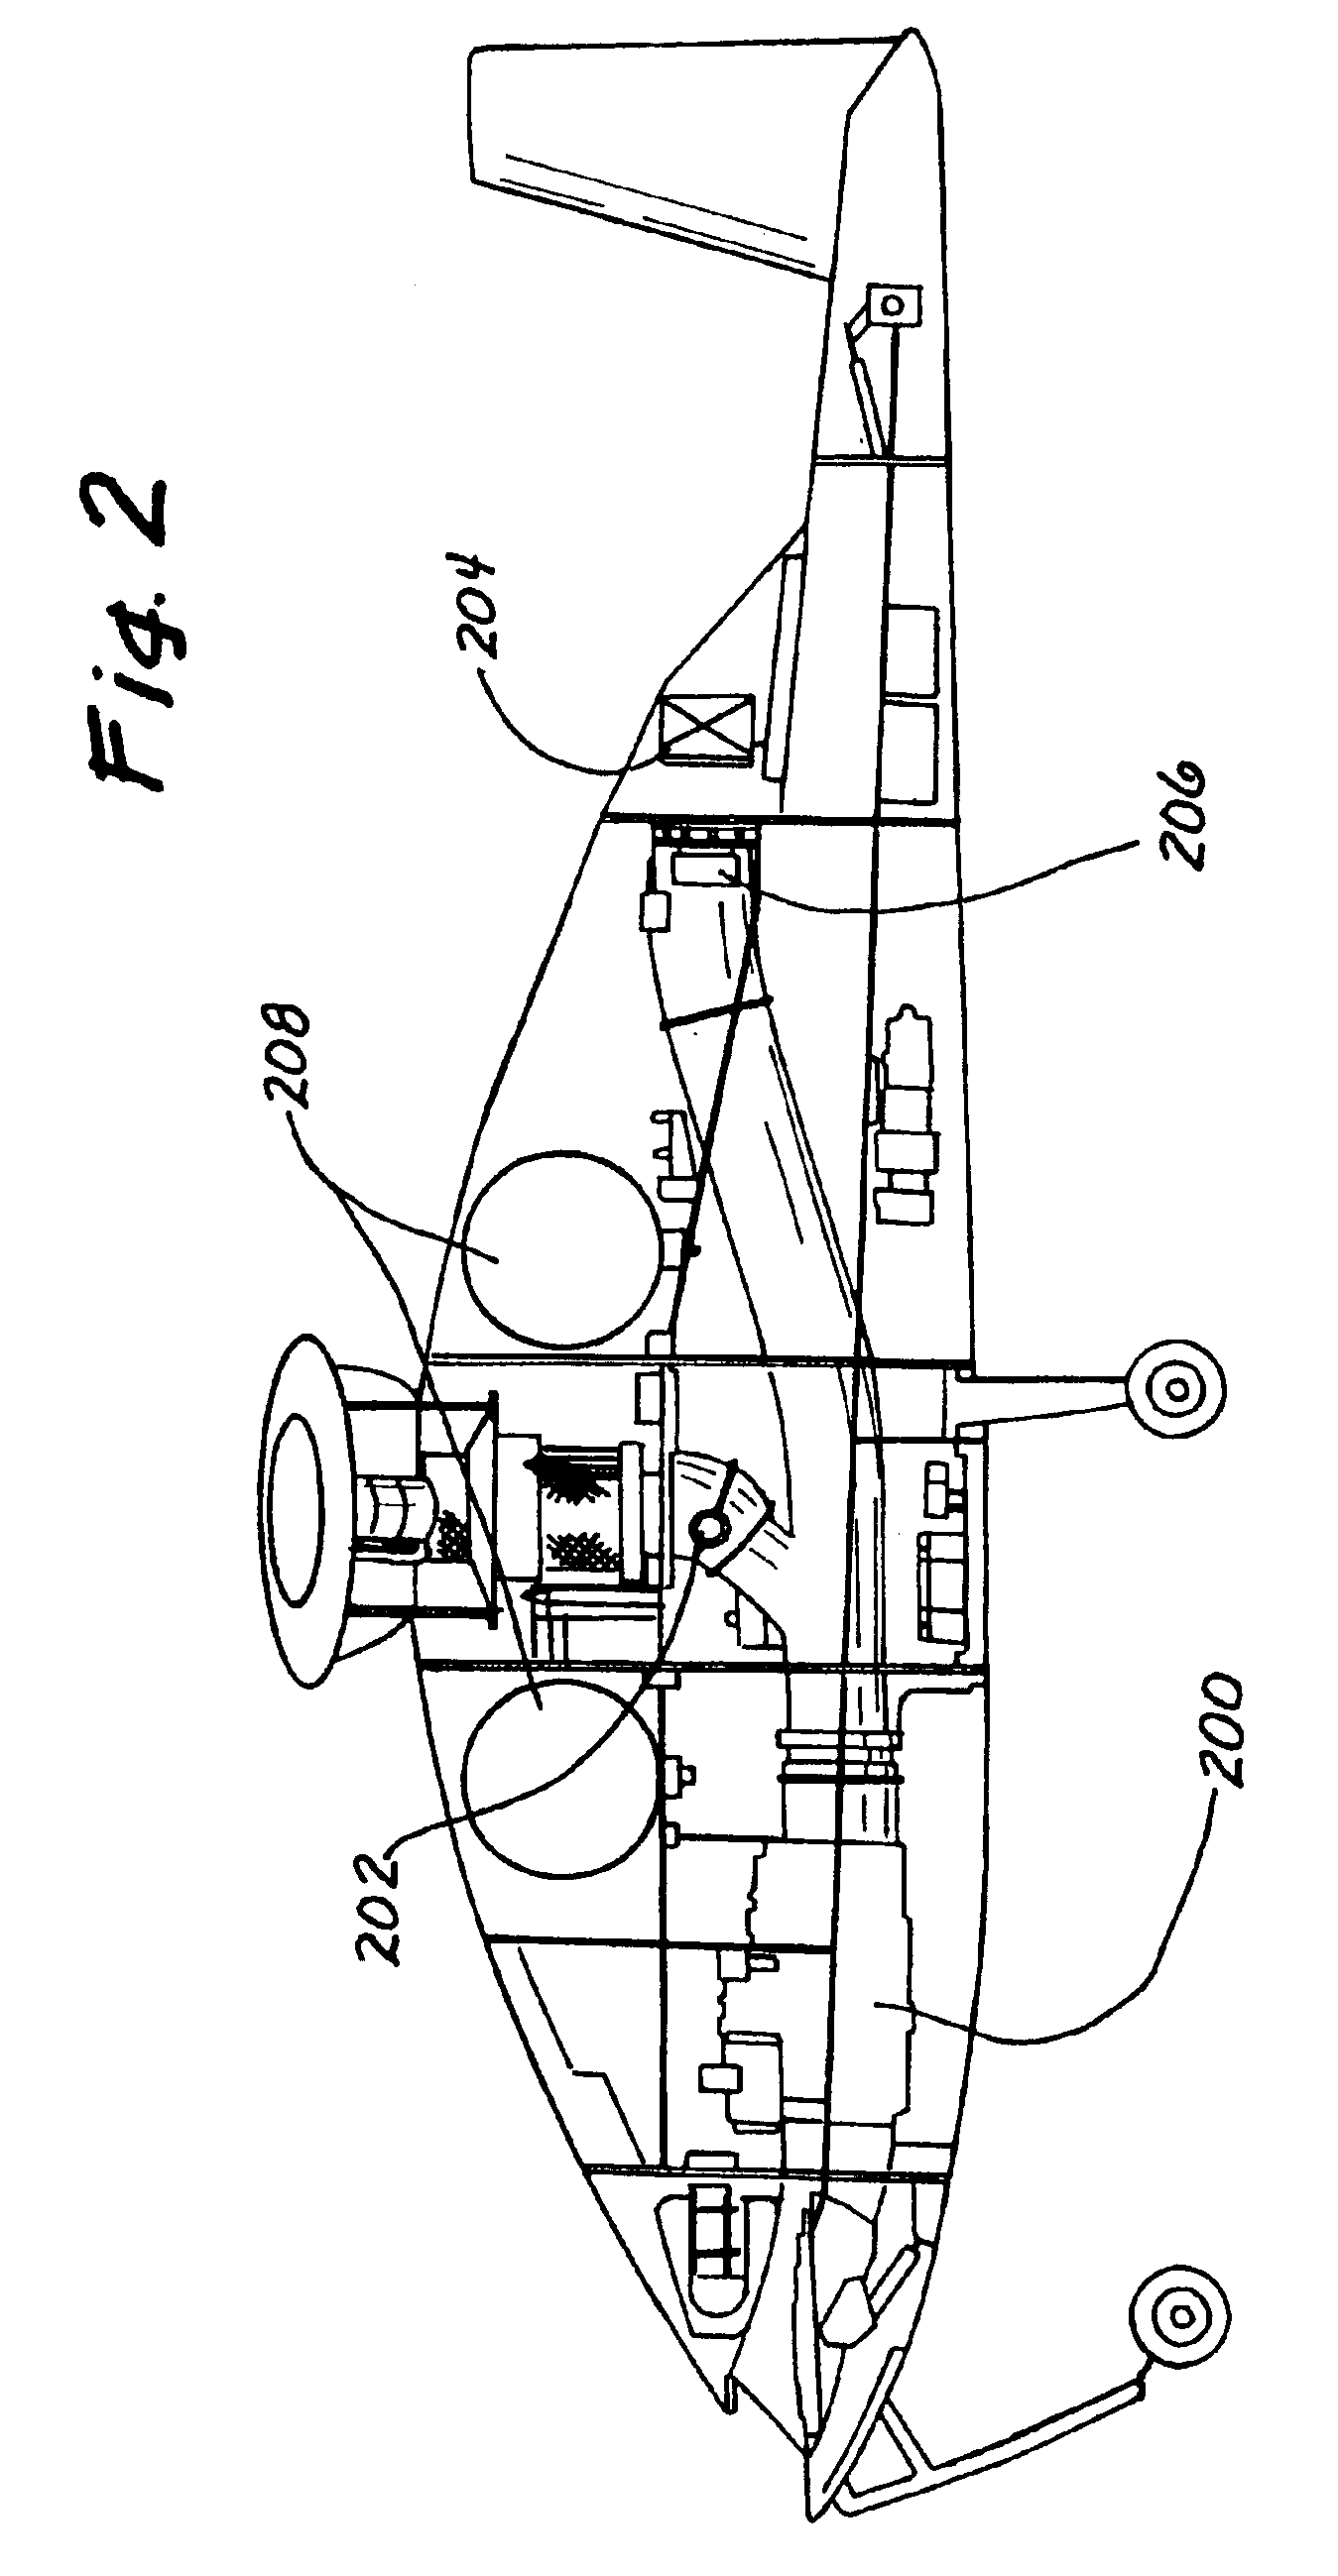 Enhanced flight control systems and methods for a jet powered tri-mode aircraft